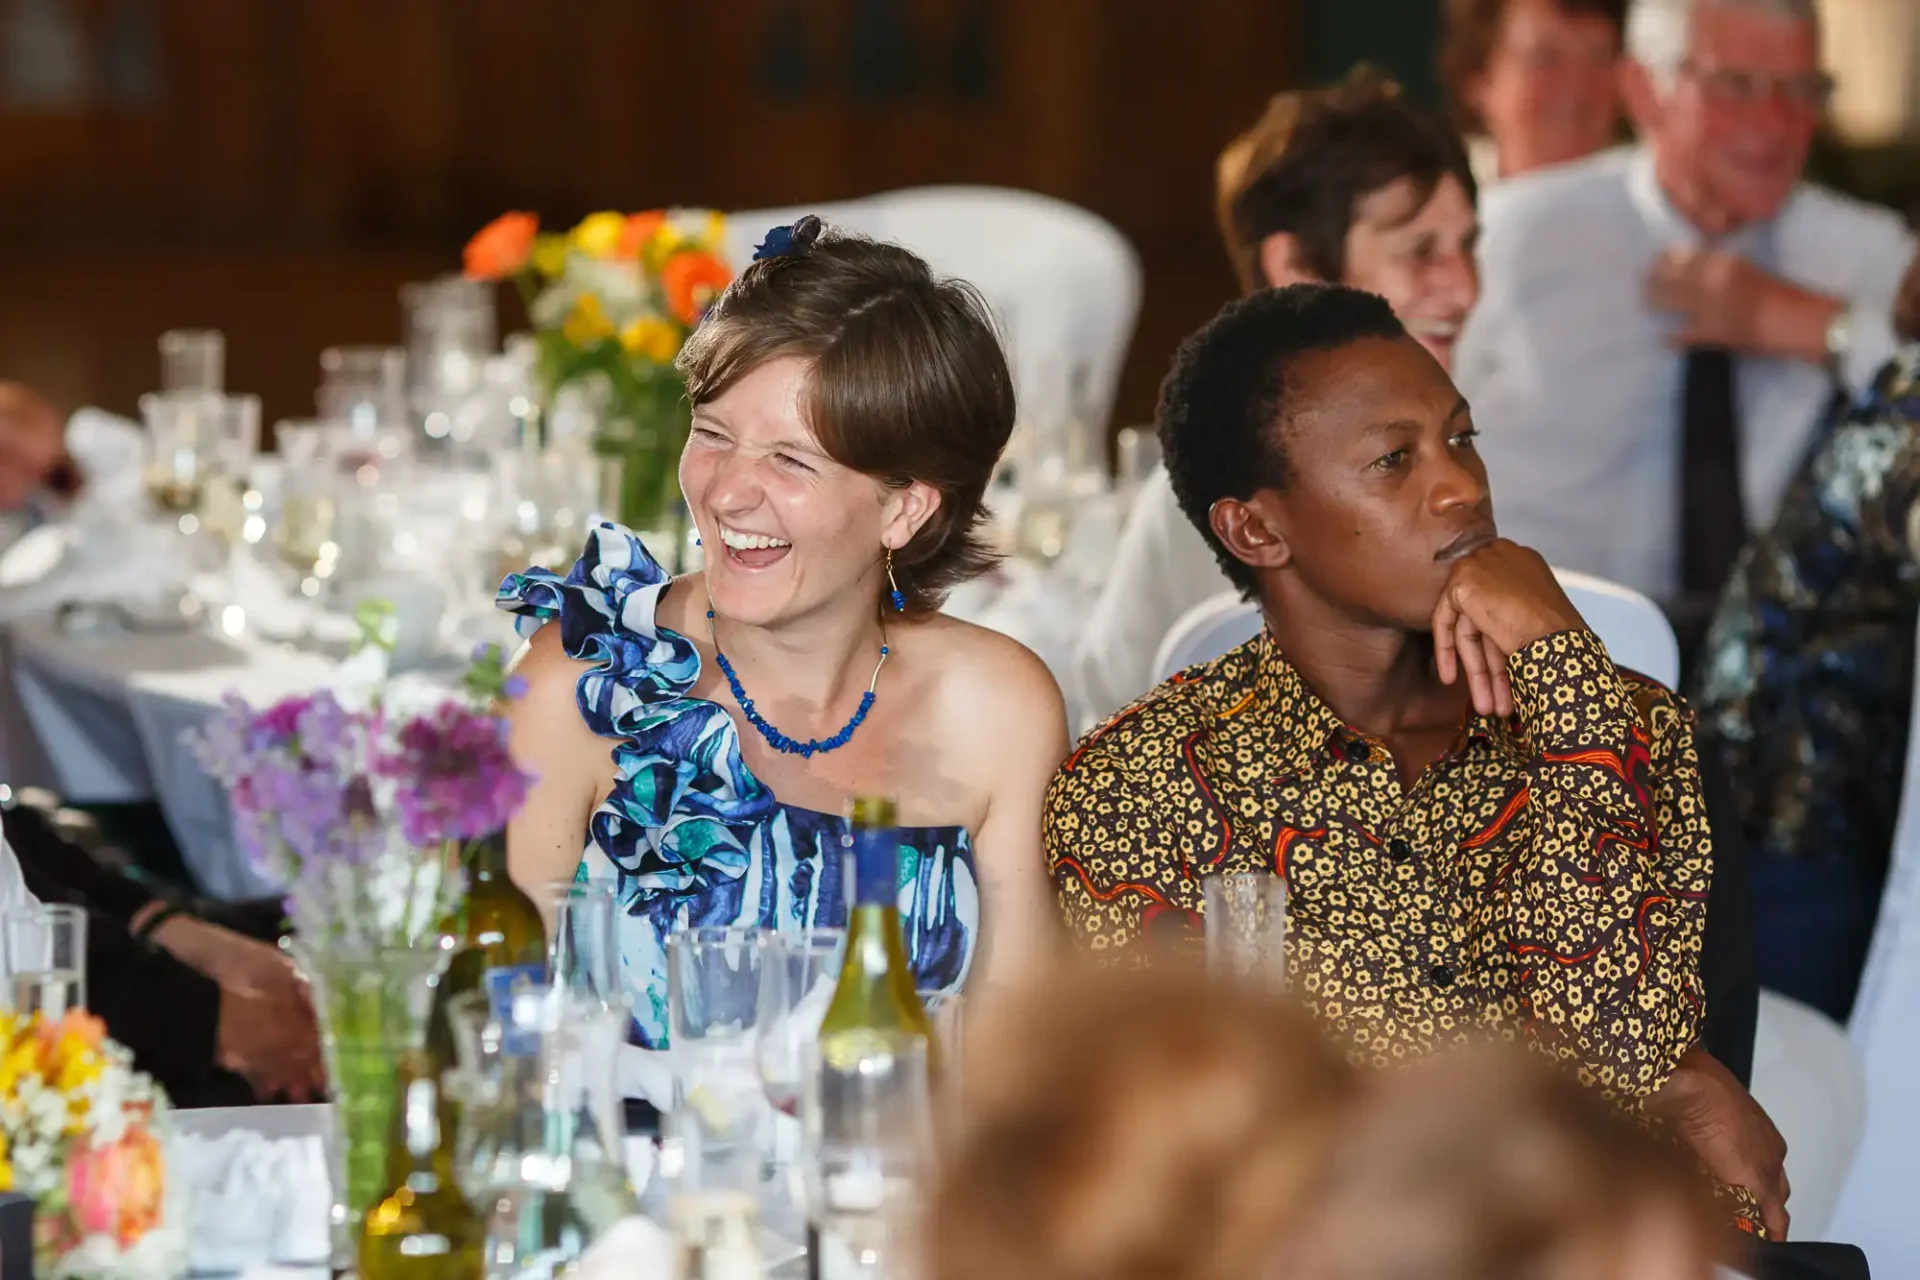 A woman laughing joyfully in a blue dress and a man in a patterned shirt attentively watching a speech at a festive event with guests and floral decorations in the background.